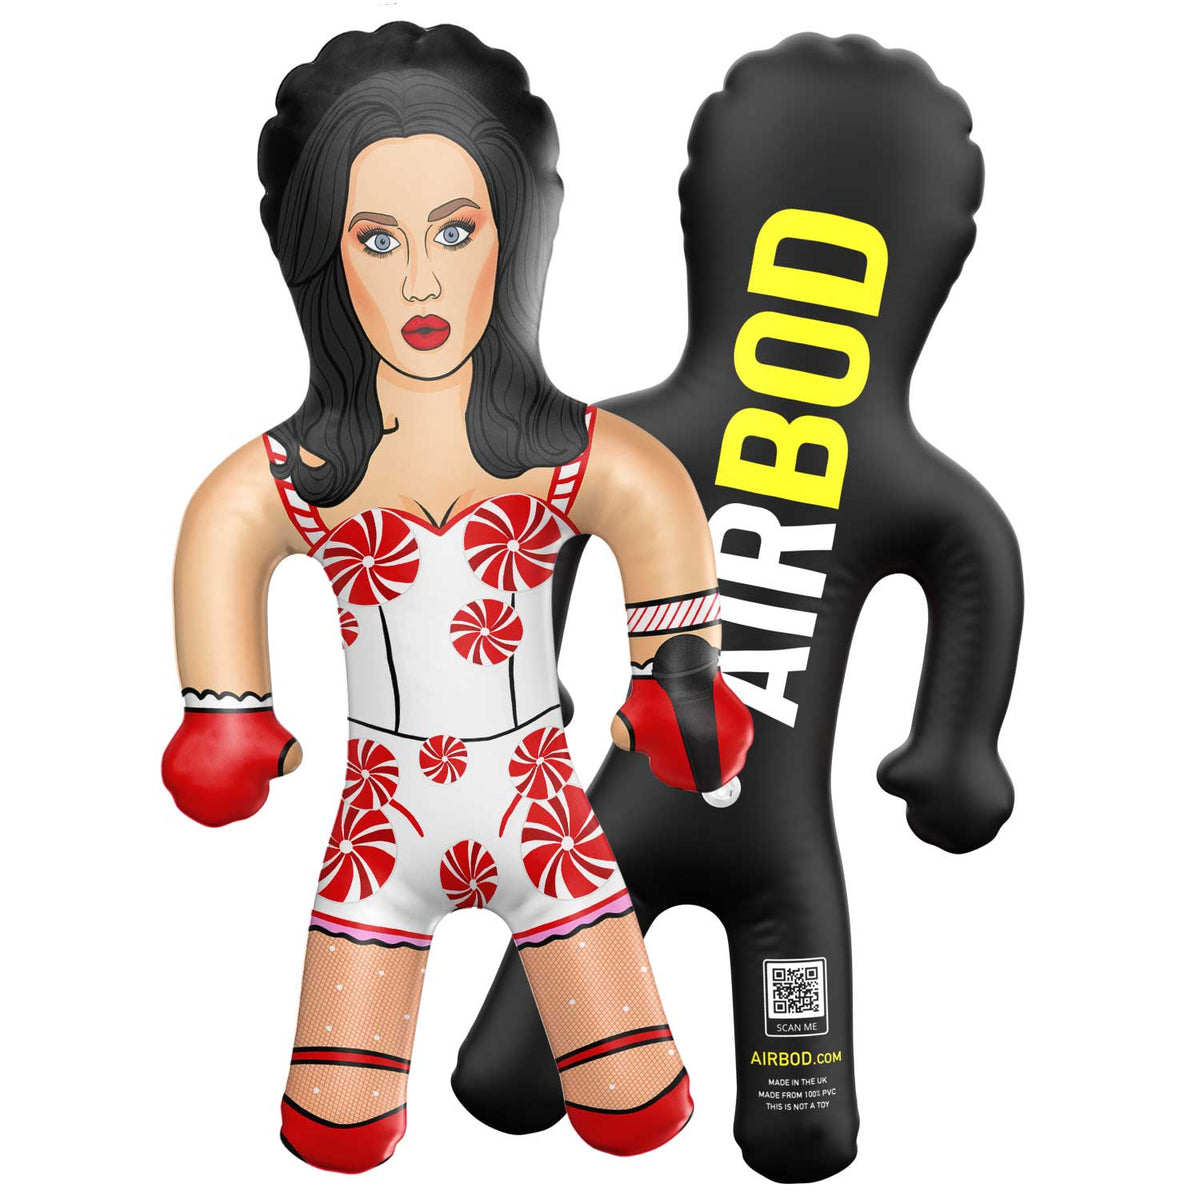 katy perry blow up doll